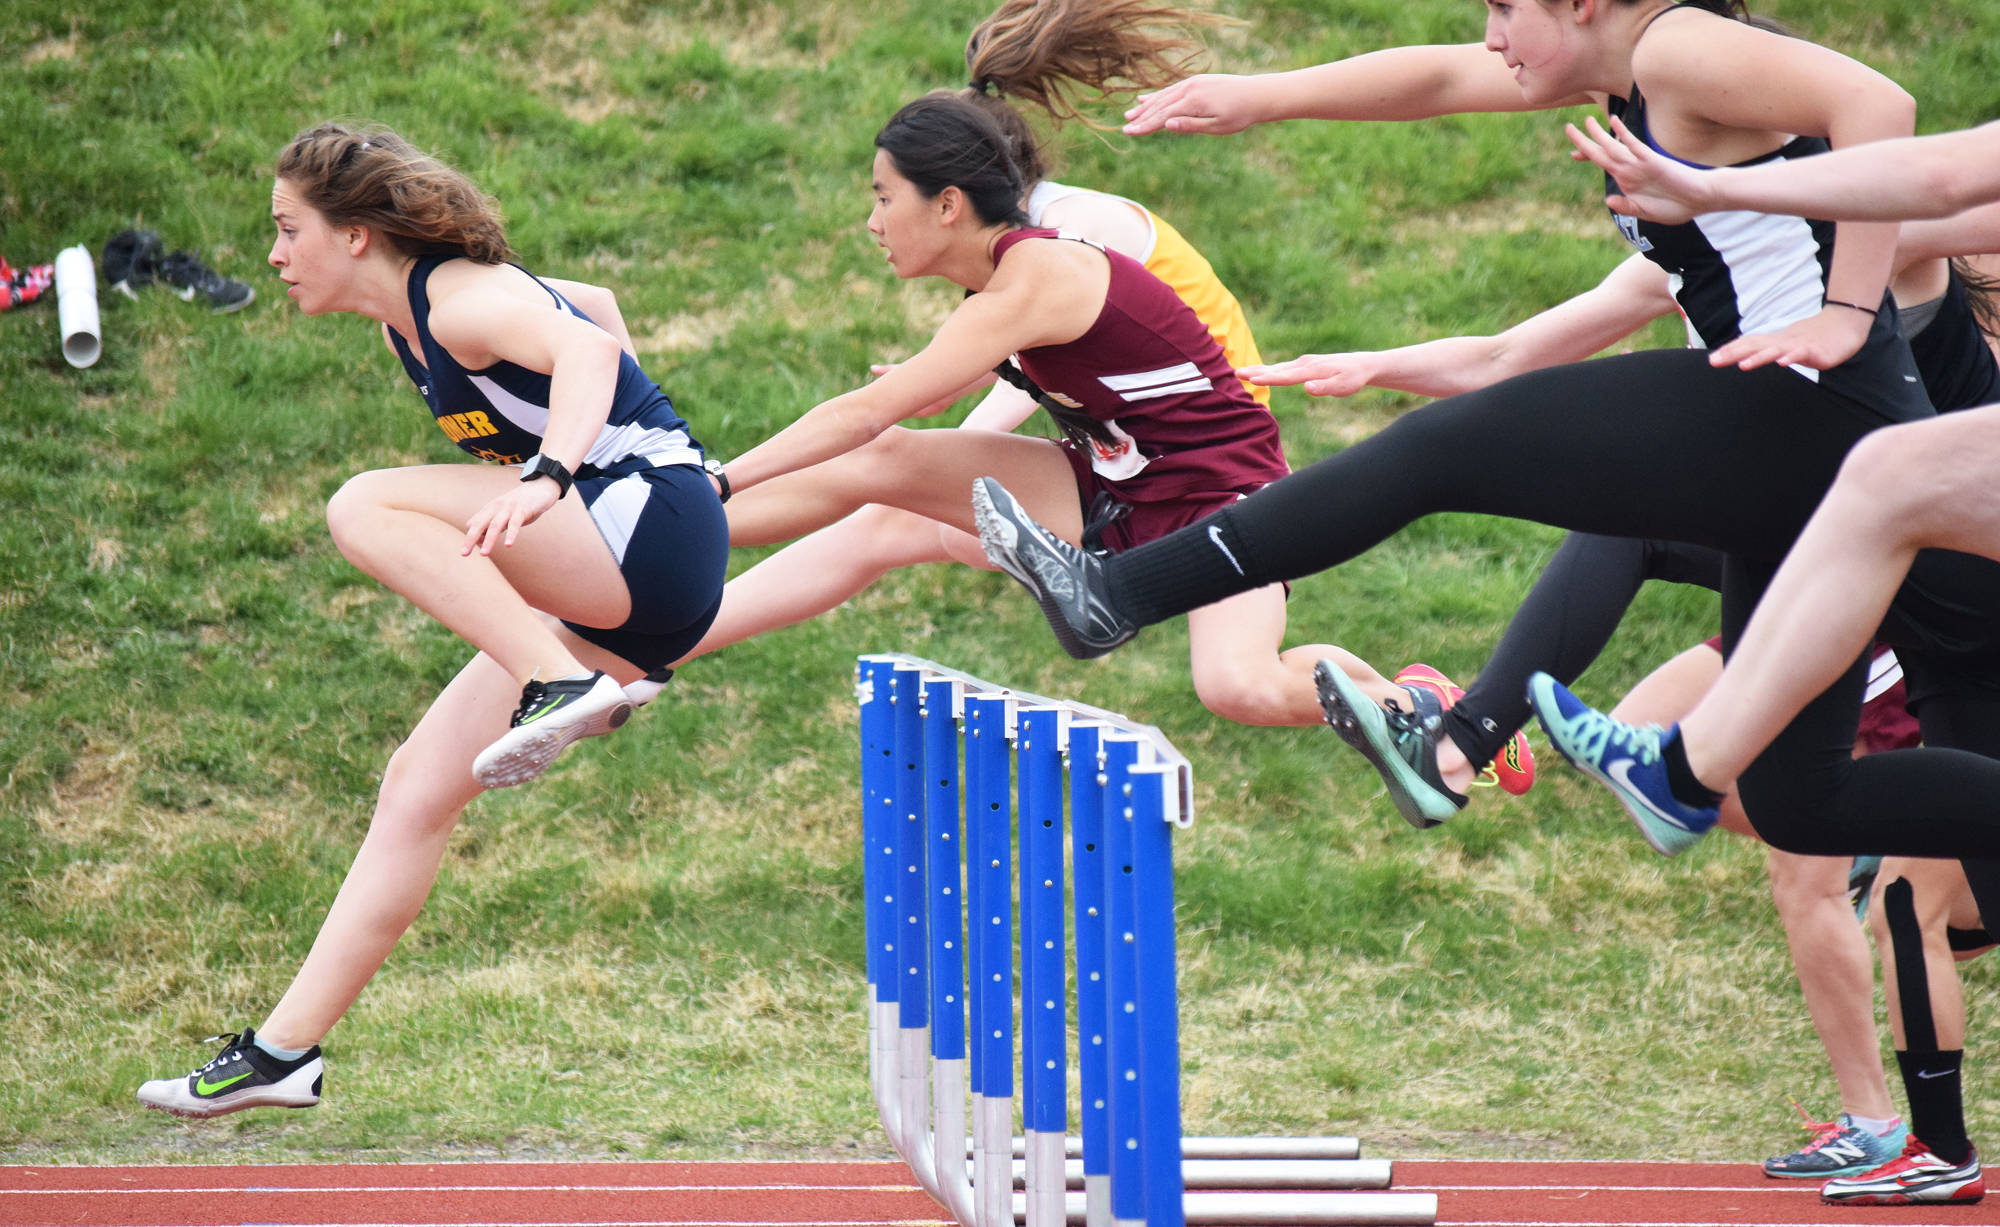 Homer’s Lauren Evarts (far left) leads the field over the first barrier in the Class 3A girls 100-meter hurdles final Saturday at the Region III track & field championships in Homer. (Photo by Joey Klecka/Peninsula Clarion)